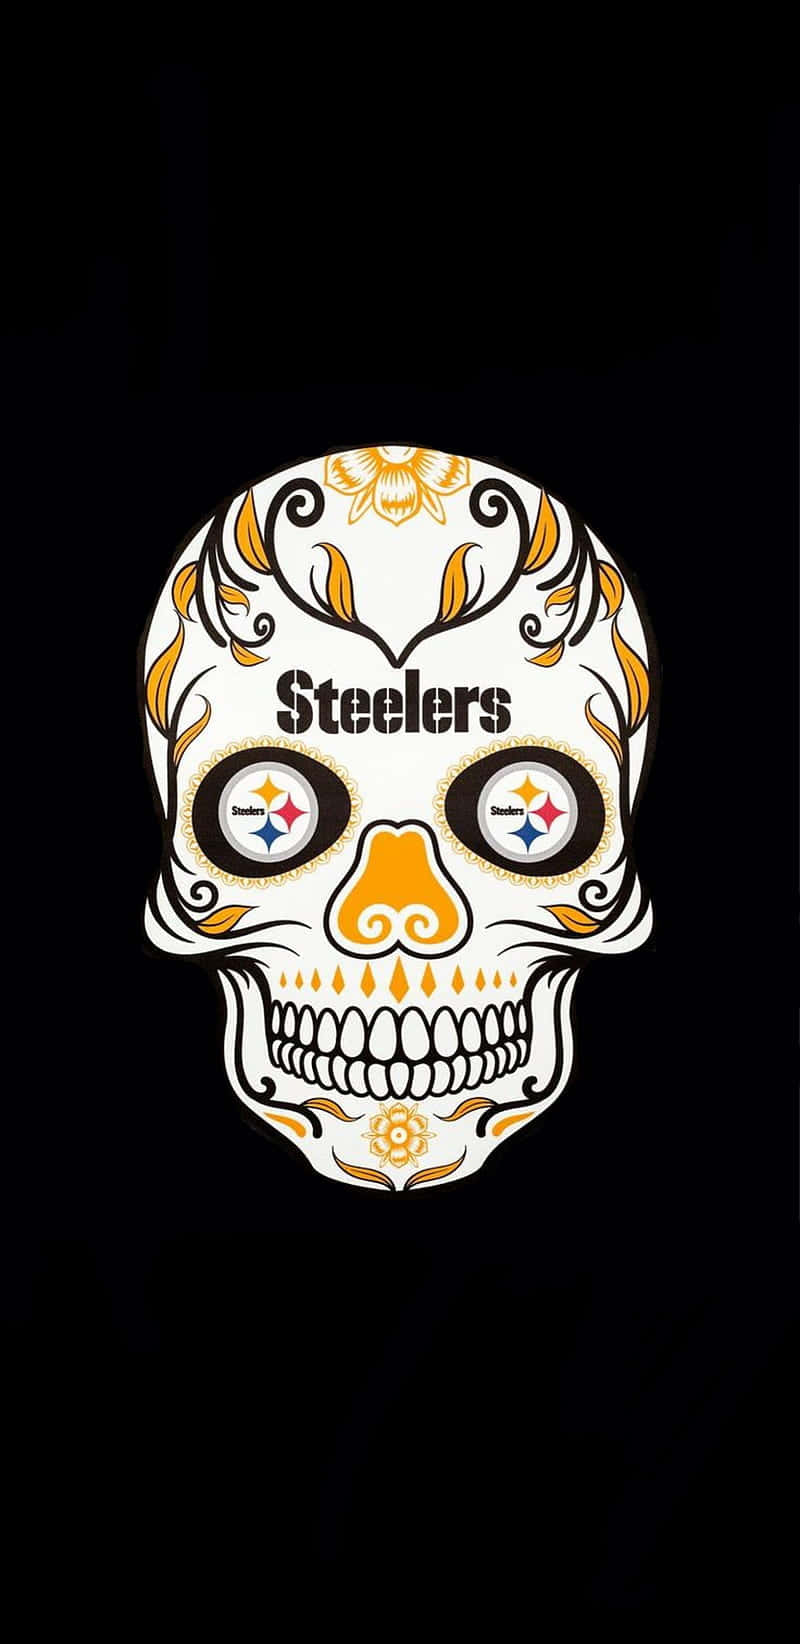 Let's Get Loud and Show Your Steelers Pride With This Iphone Wallpaper